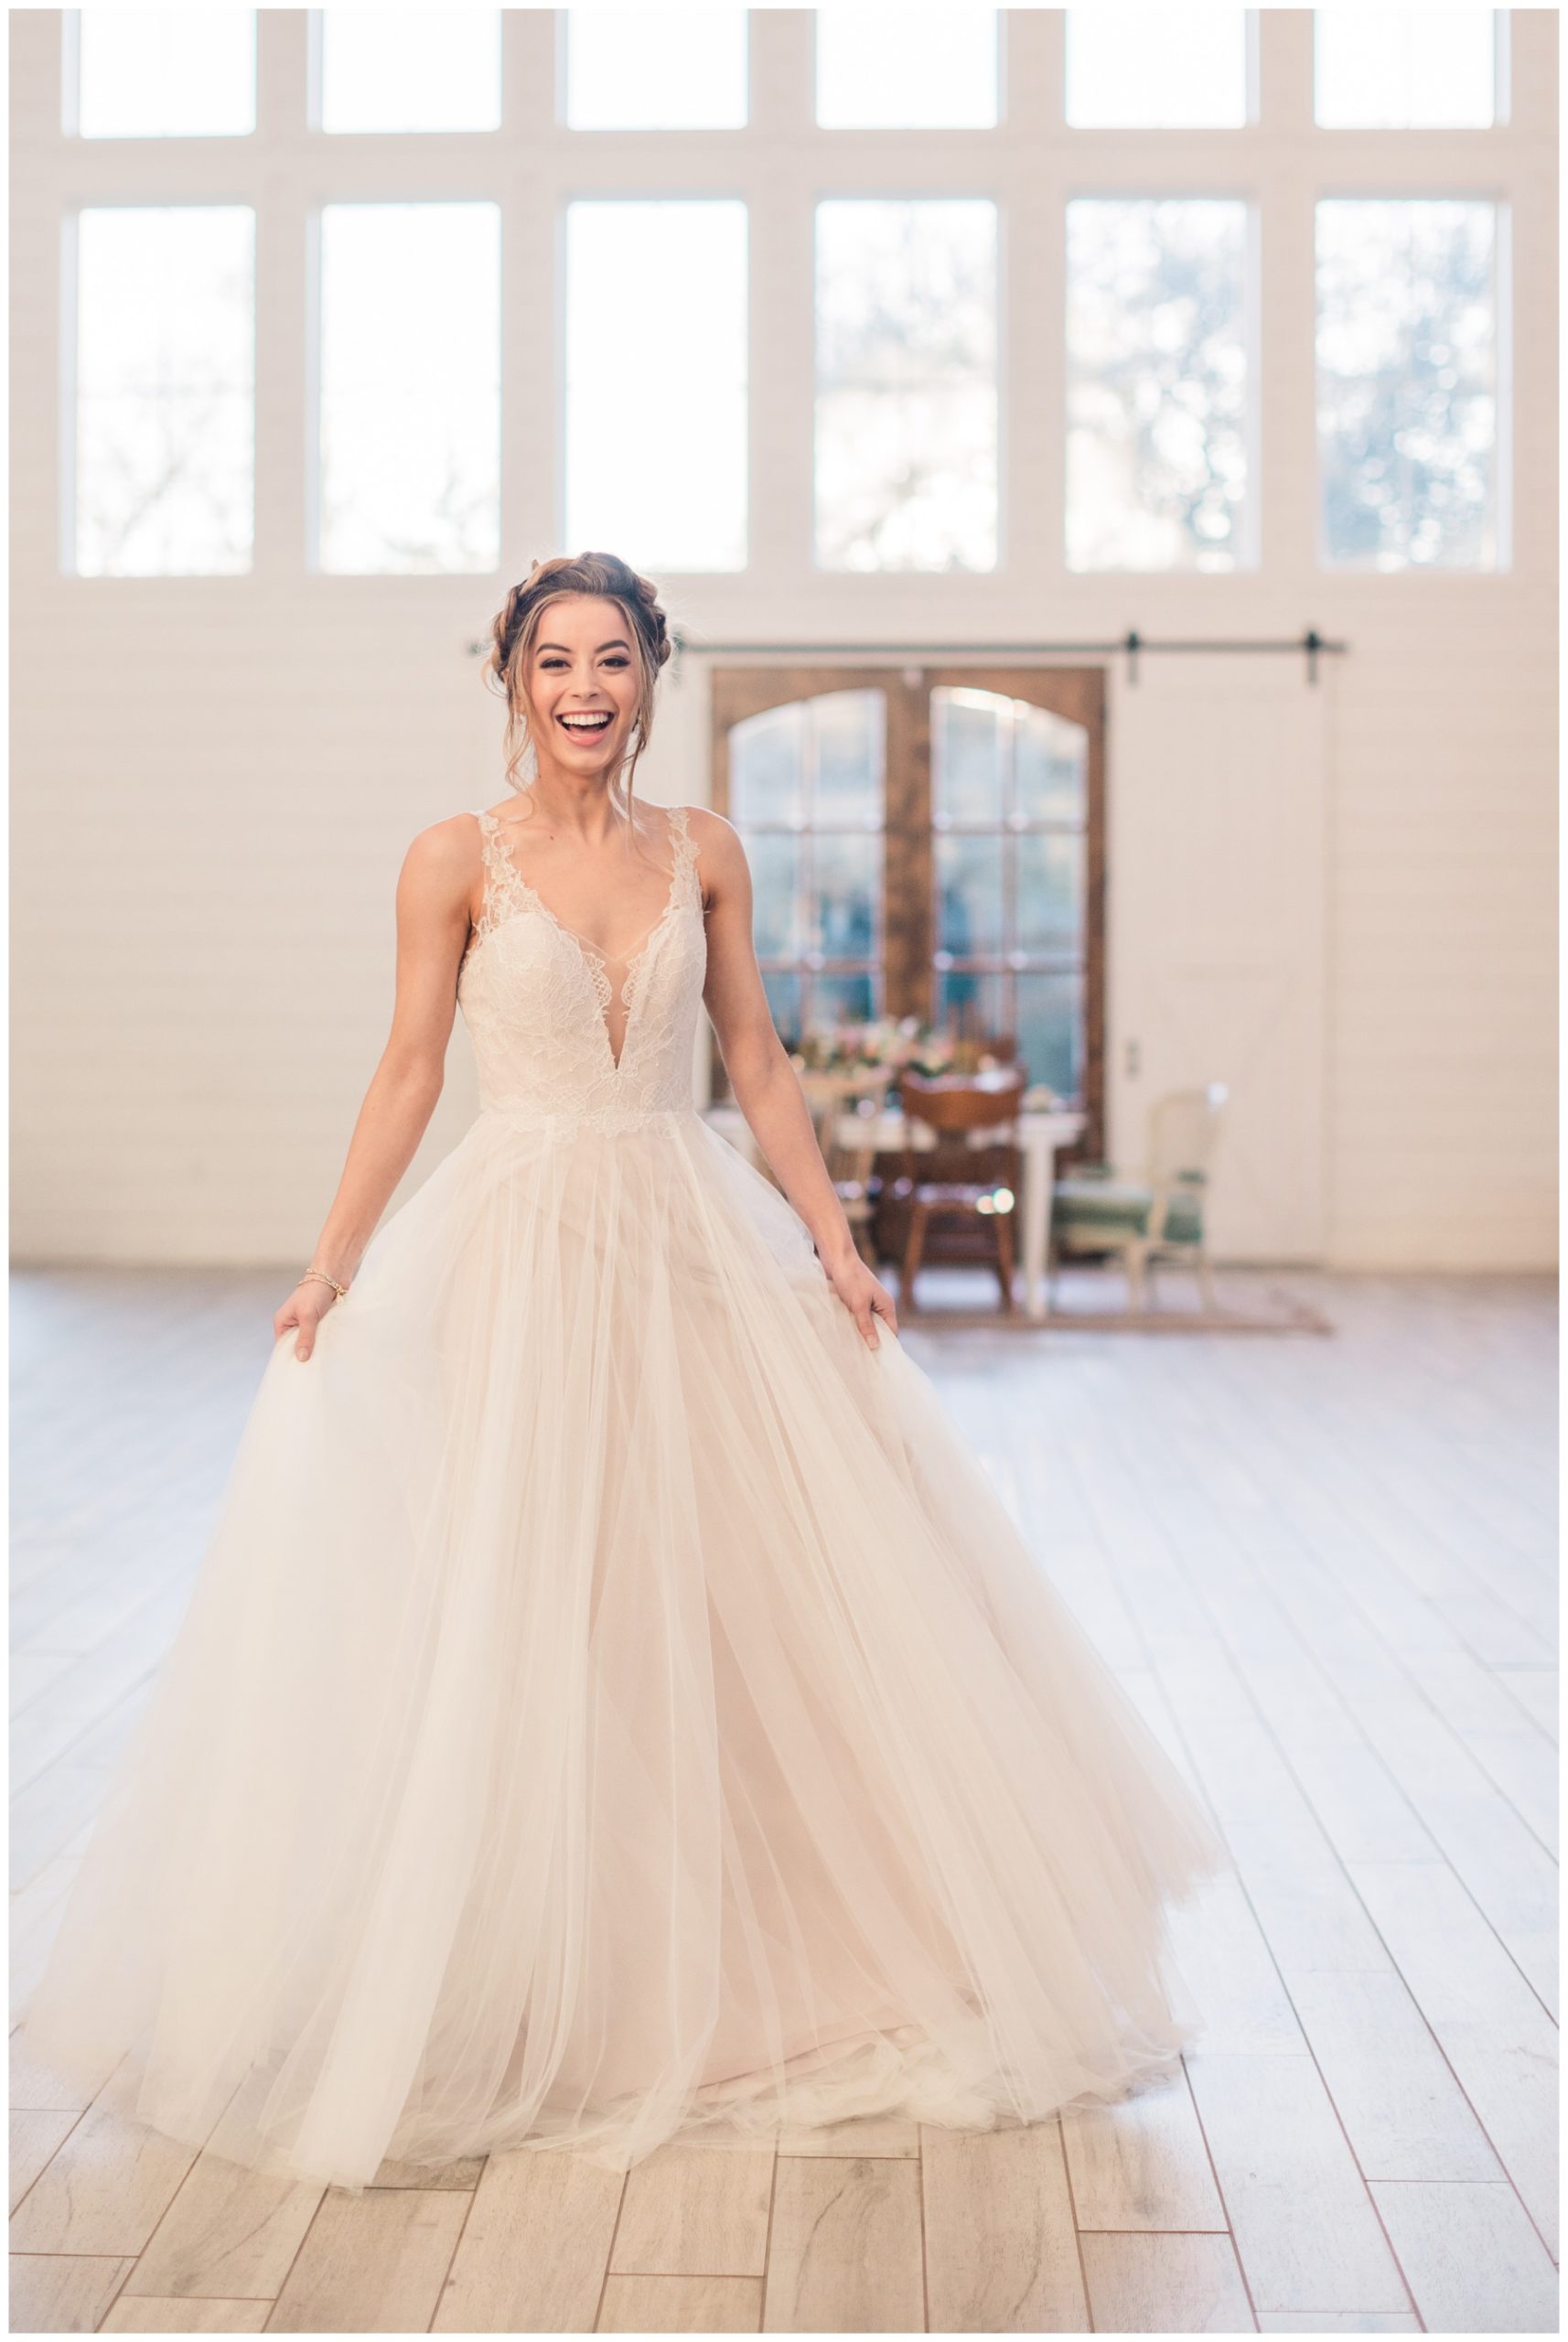 Bride in a BHLDN gown with deep v neckline and tulle skirt